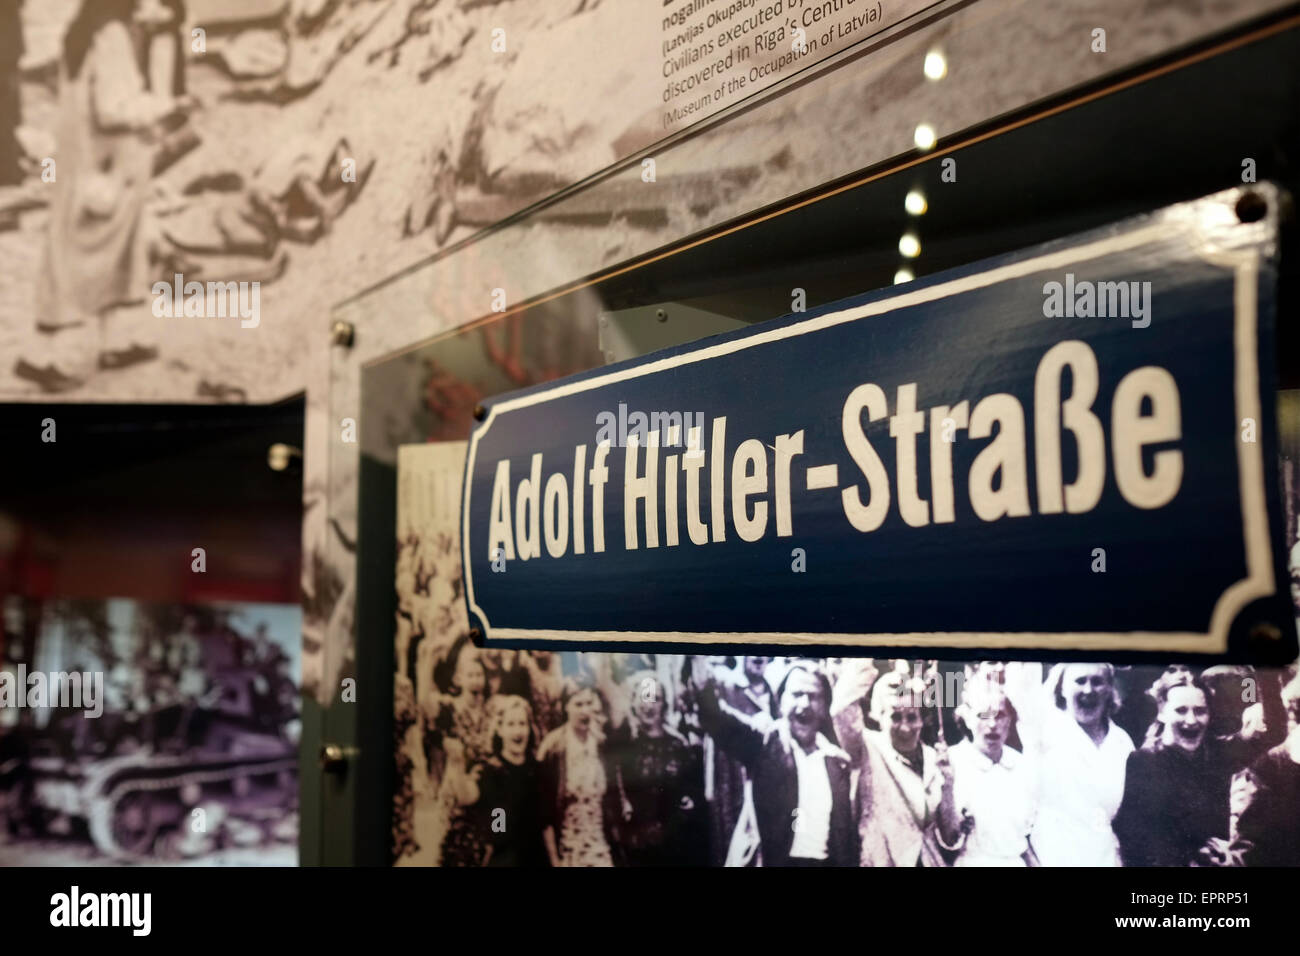 Adolf Hitler street sign from the Nazi occupation displayed at the Museum of the Occupation of Latvia a historic educational institution established in 1993 to exhibit artifacts, archive documents, and educate the public about the 51-year period in the 20th century when Latvia was successively occupied by the USSR in 1940–1941, then by Nazi Germany in 1941–1944, and then again by the USSR in 1944–1991 located in the city of Riga capital of Republic of Latvia Stock Photo